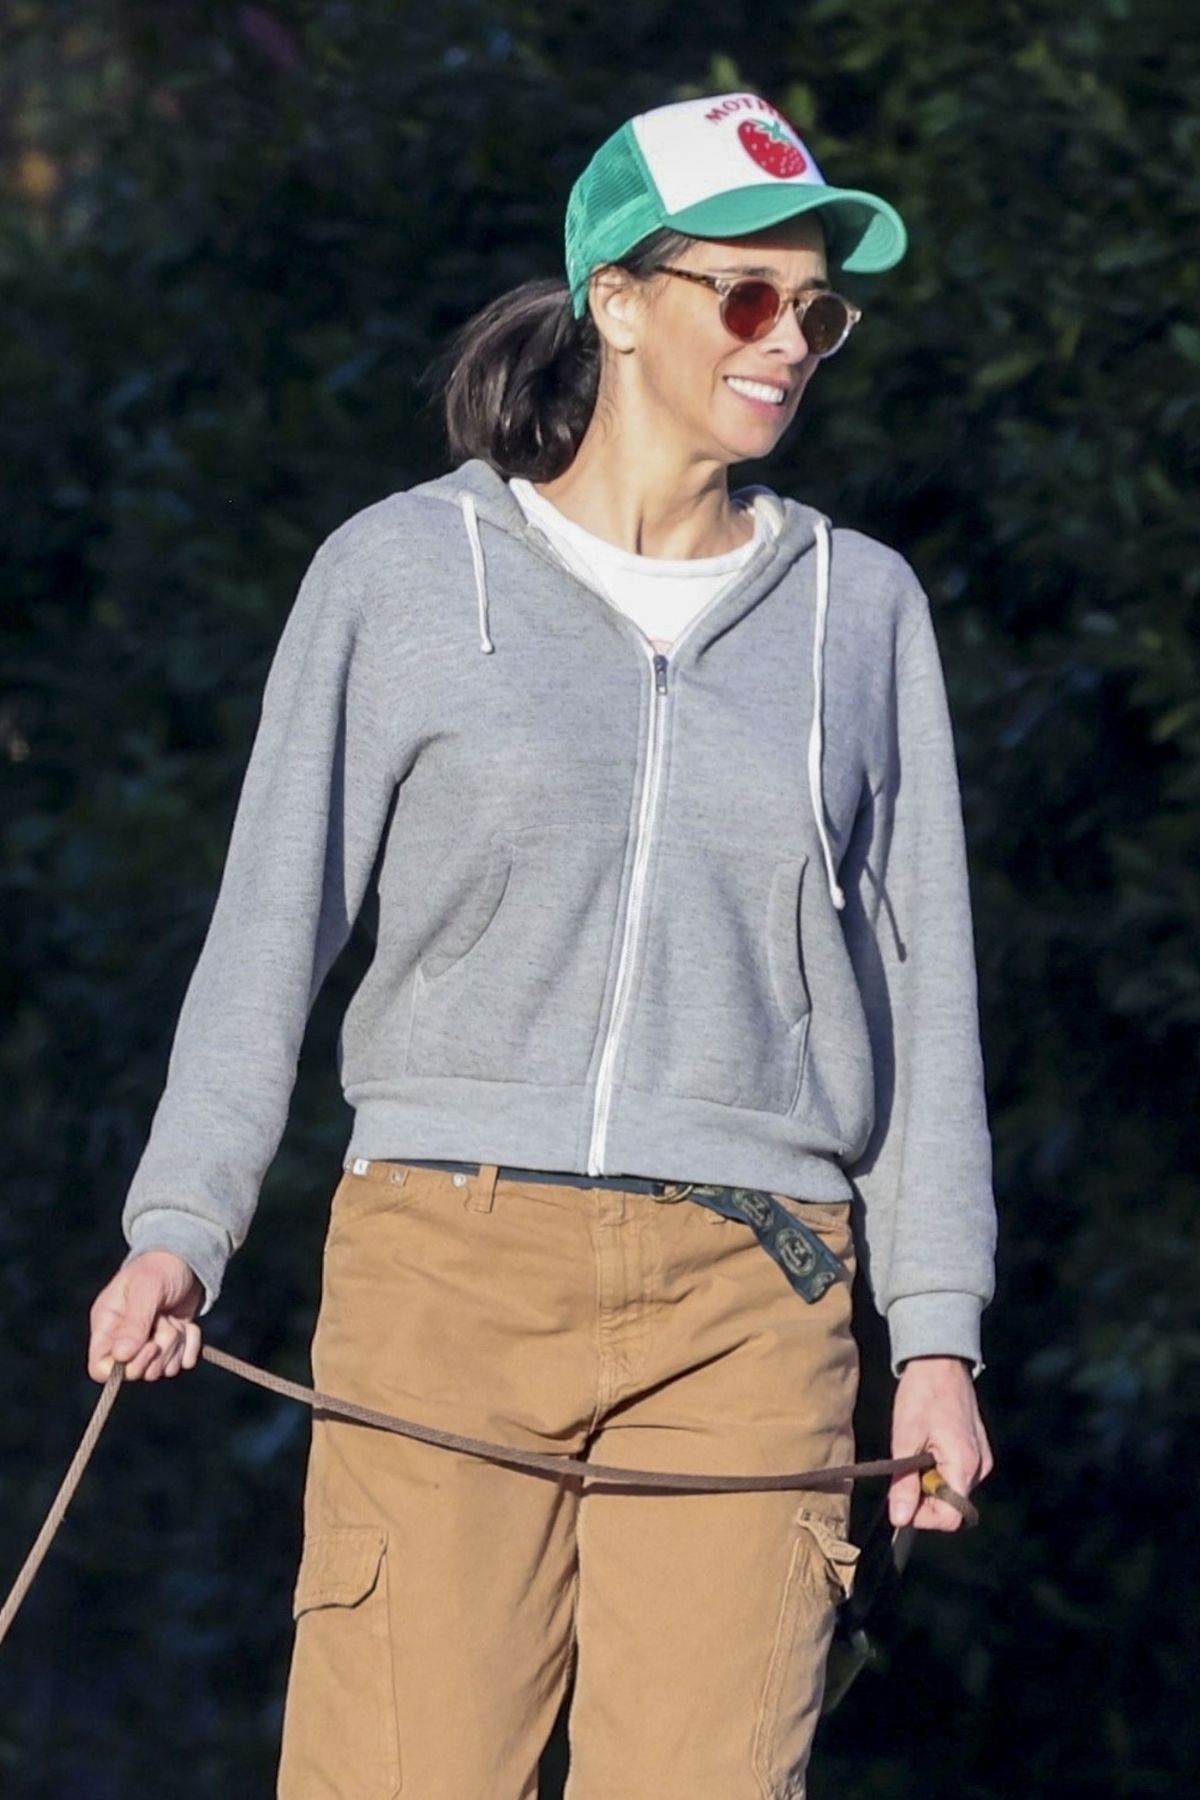 Sarah Silverman and Rory Albanese enjoy a dog day out in LA 4